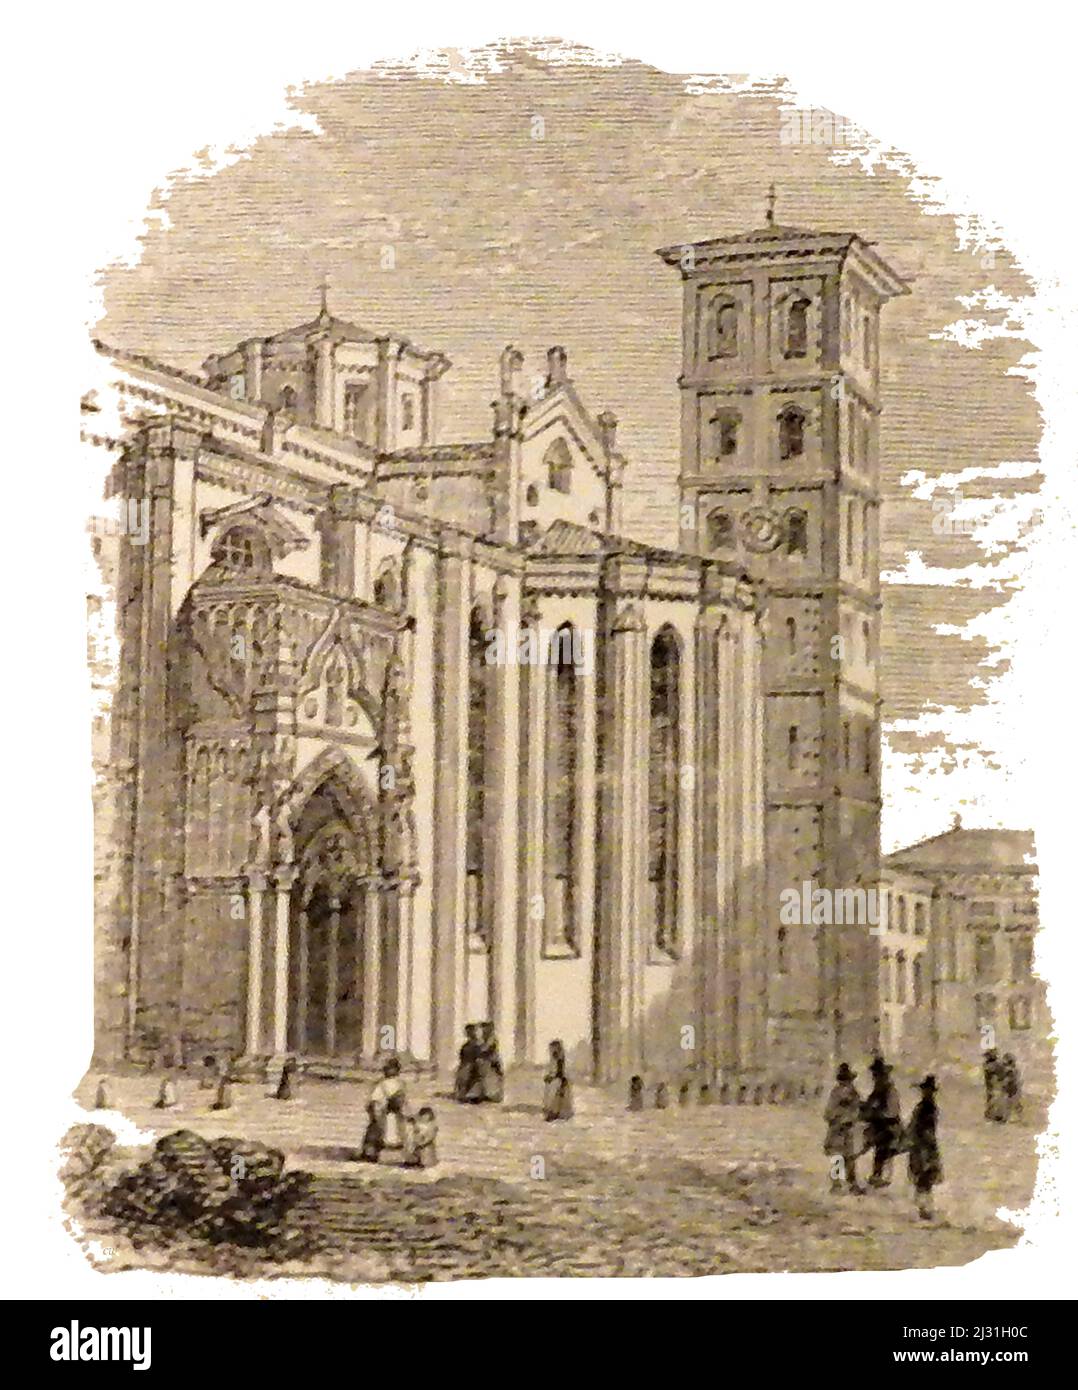 A 19th century image of St Magdala (Mary Magdalene)  church in Asti.(now Asti Cathedral, Cattedrale di Santa Maria Assunta e San Gottardo & Cattedrale di Asti)   ------  Asti or Ast in the local dialect is a commune of 74,348 inhabitants   in the Piedmont region of north-western Italy. Mary Magdalene is considered to be a saint by the Catholic, Eastern Orthodox, Anglican, and Lutheran churches Stock Photo